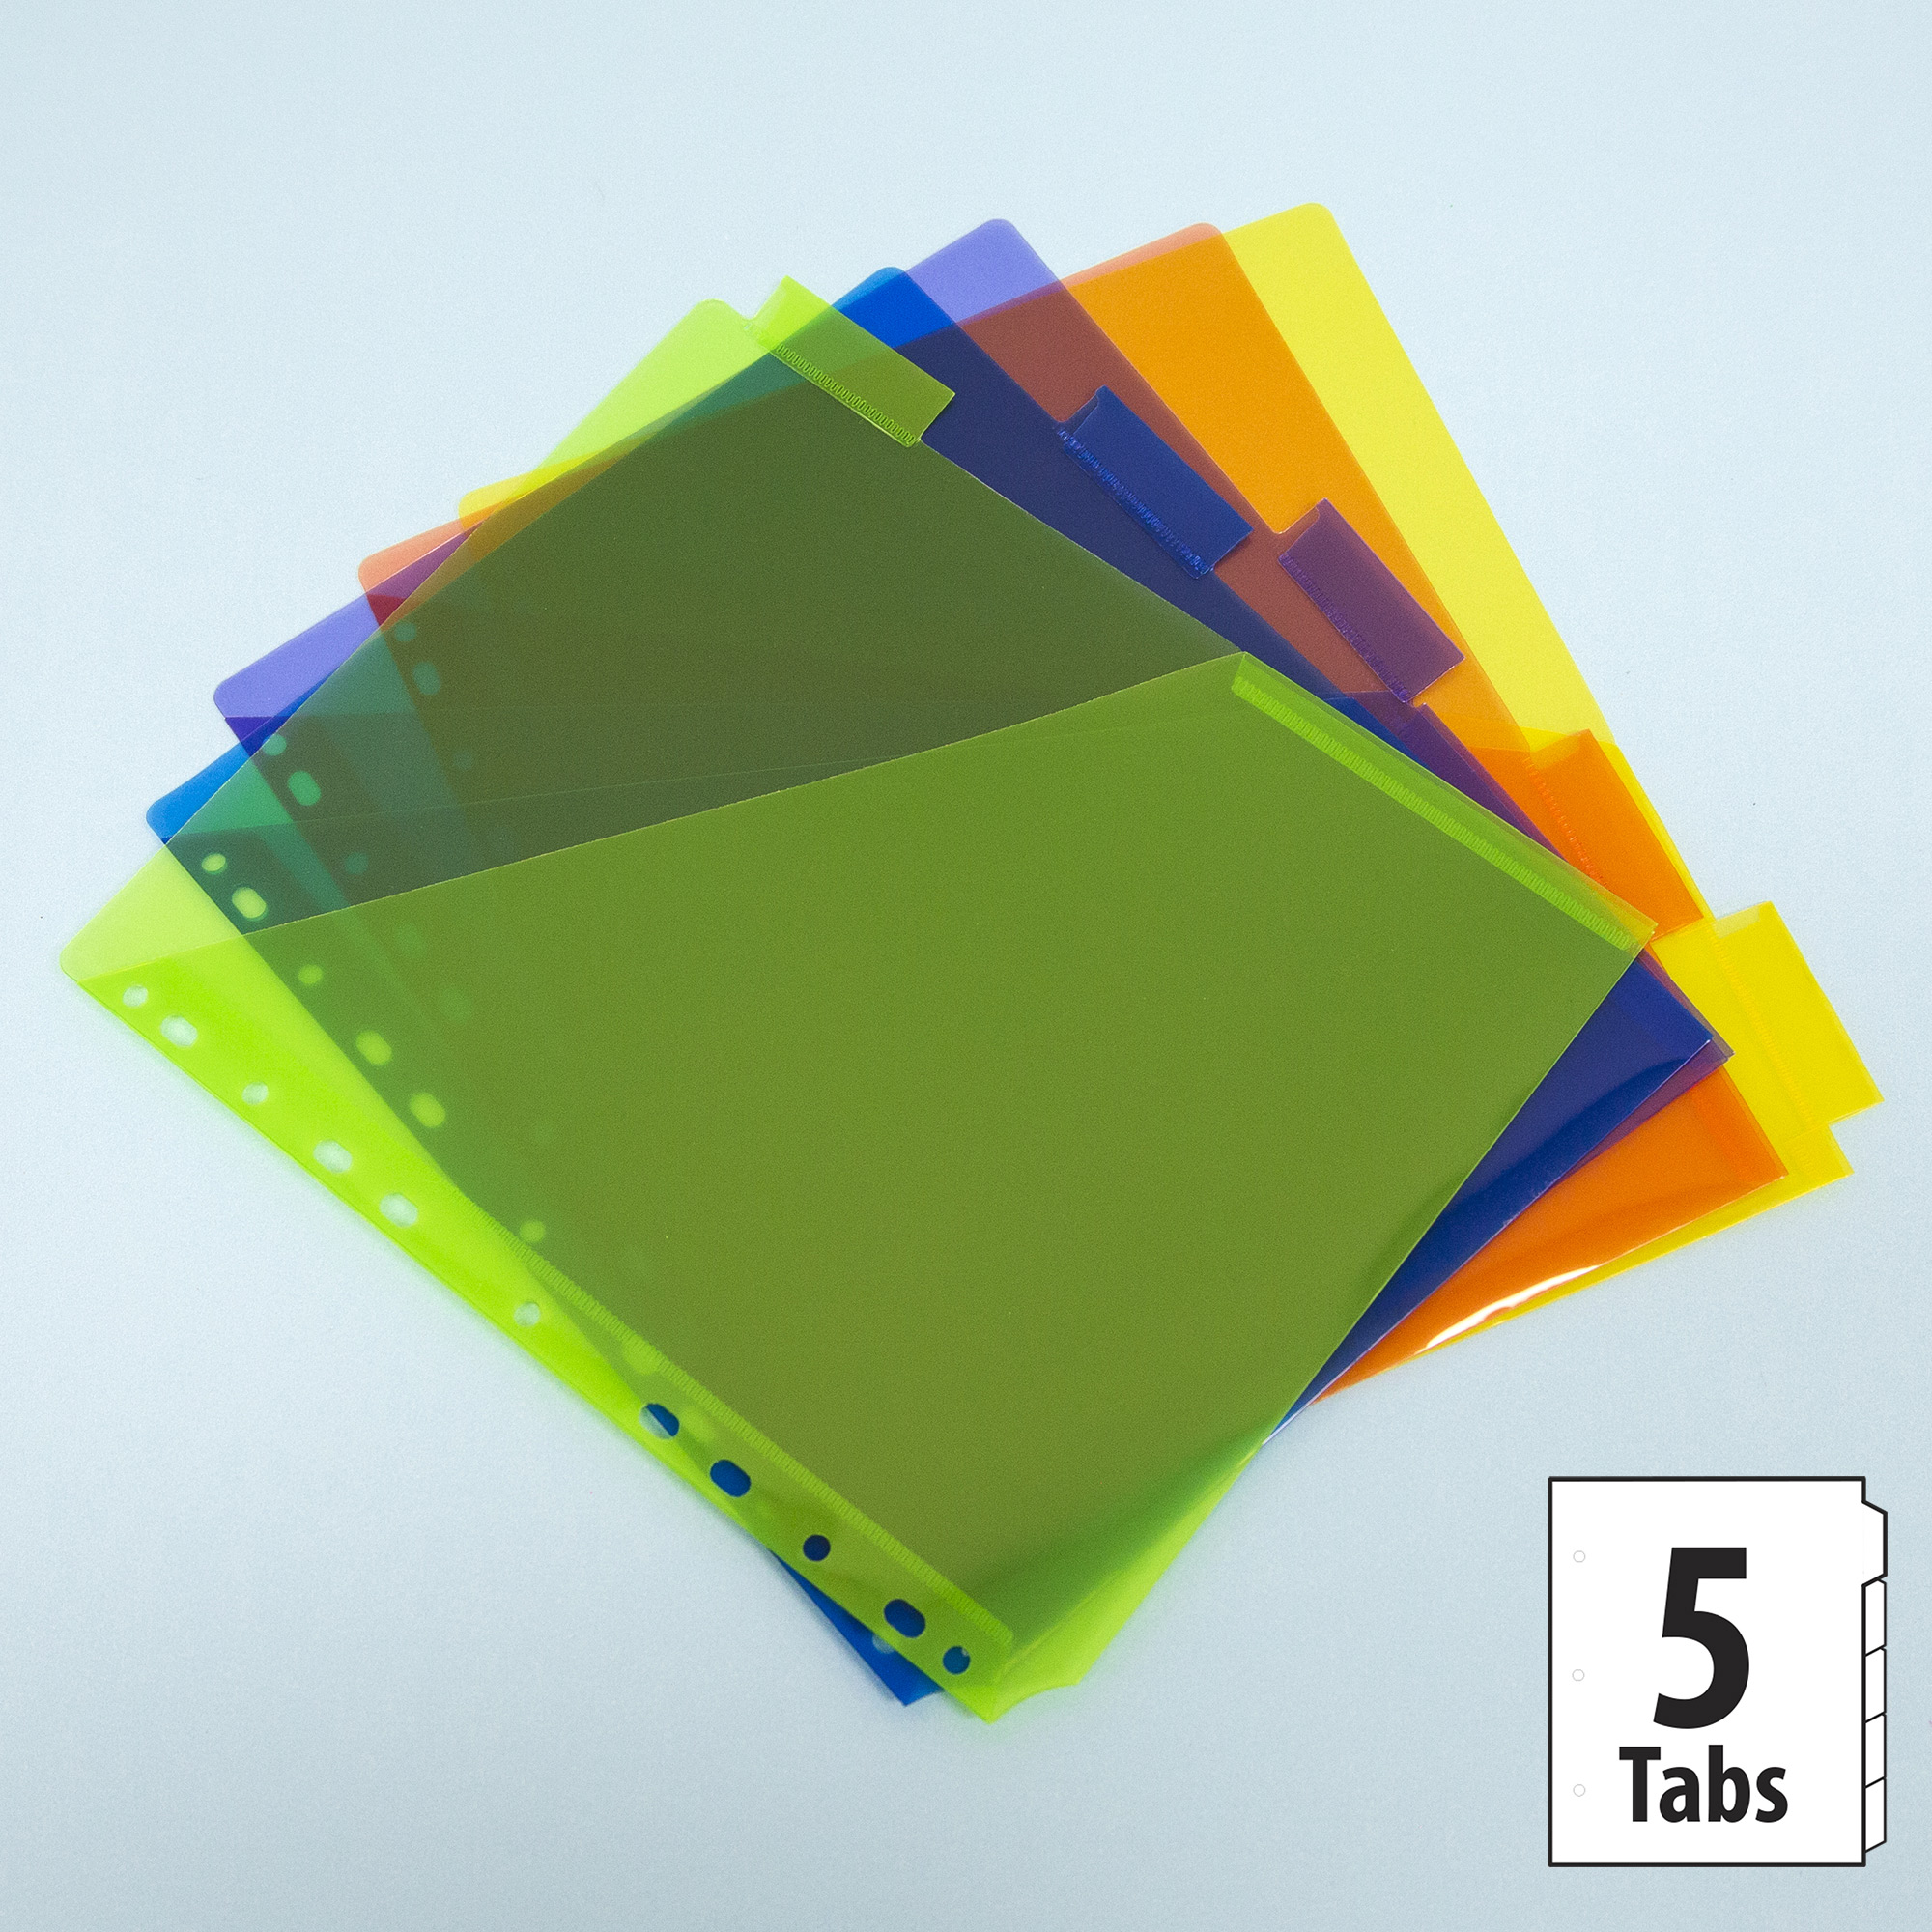 5-Tab Plastic Dividers w/Front Pockets Pack of 3 Sets 15PCS Tab Dviders Assorted Colors Multicolor Dviders with Pockets for Binders